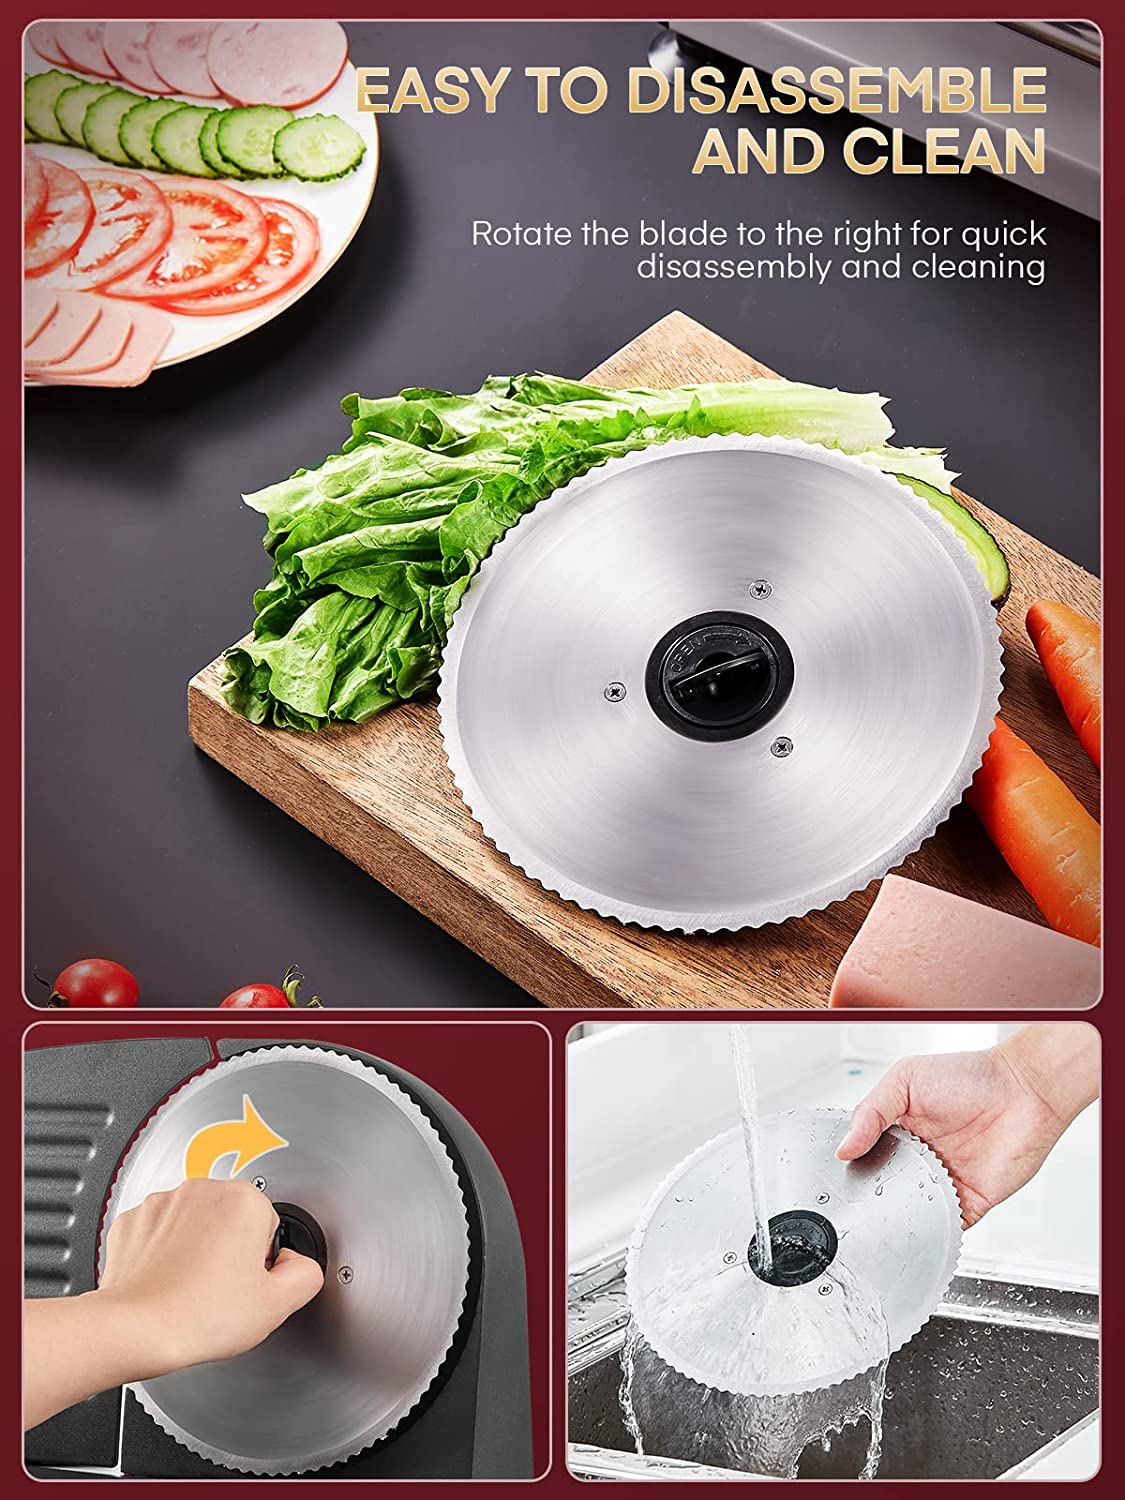 easy to disassemble and clean, Meat Slicer 200 Watt for Home Use, Electric Food Slicer with “Two” Upgrade 7.5" Sharp Stainless Steel Blade(Serrated + Smooth) & 0-15mm Precise Thickness Cut Deli Food, Meat, Bread, Fruit, Vegetable